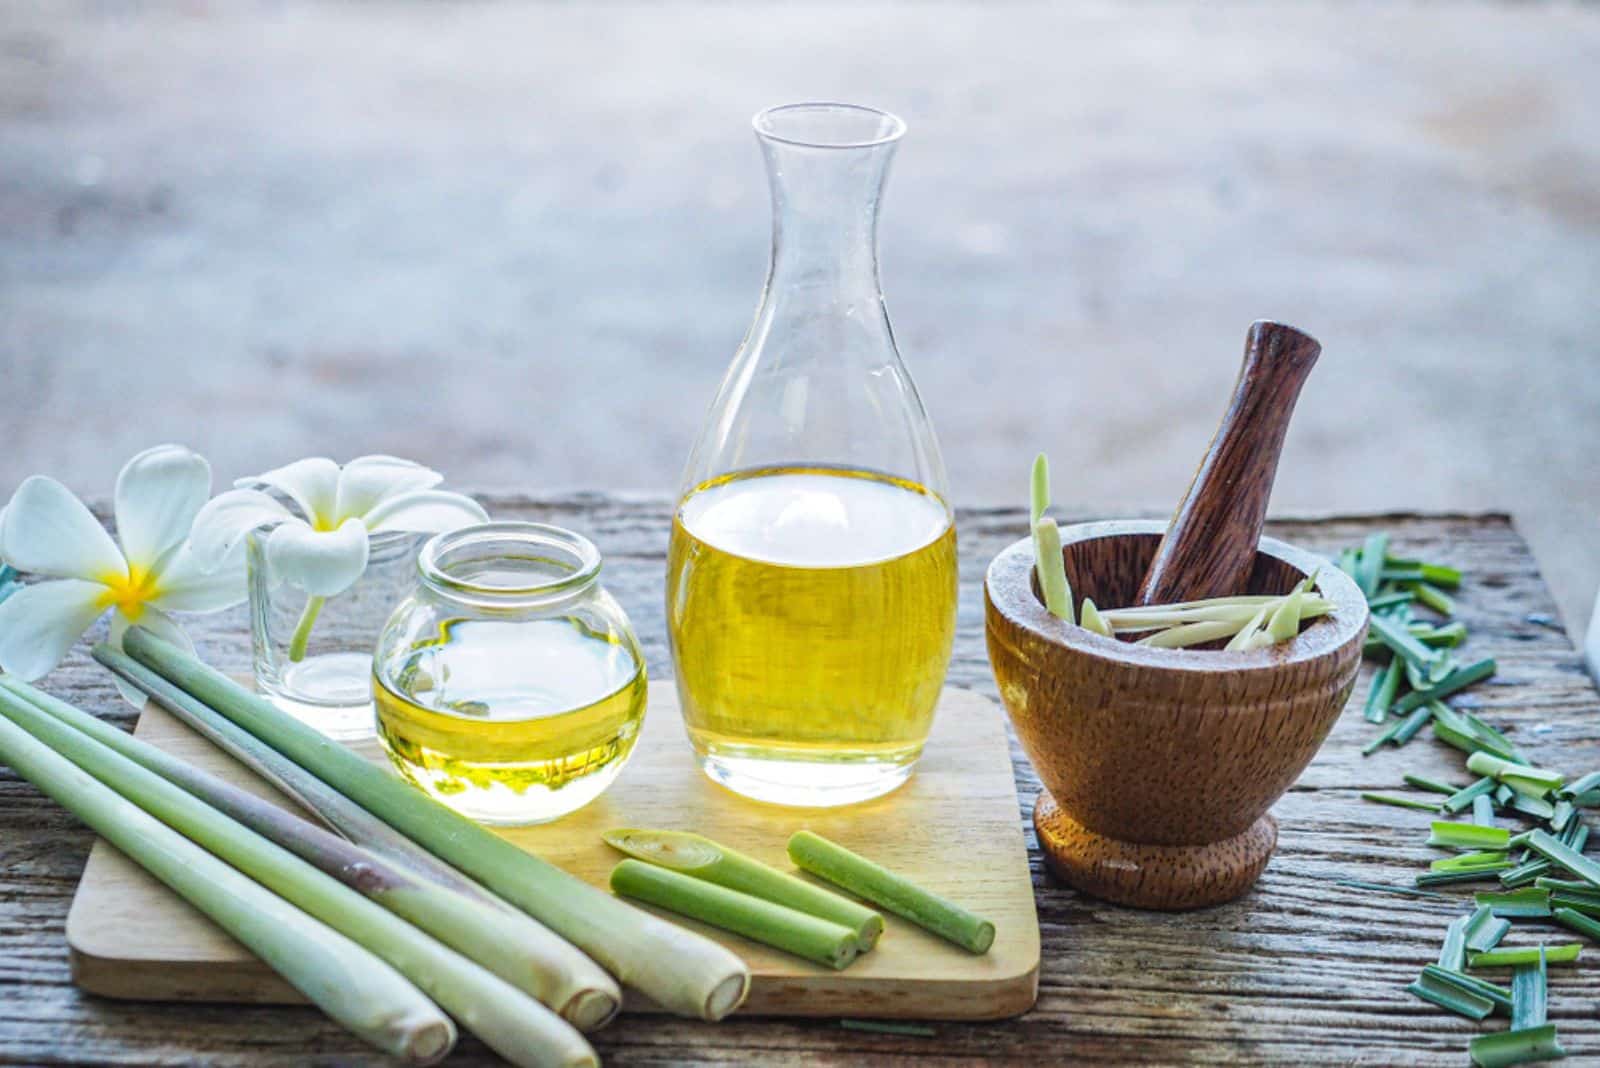 Lemongrass essential oil is placed on the table using hand and body drip oil lemongrass oil